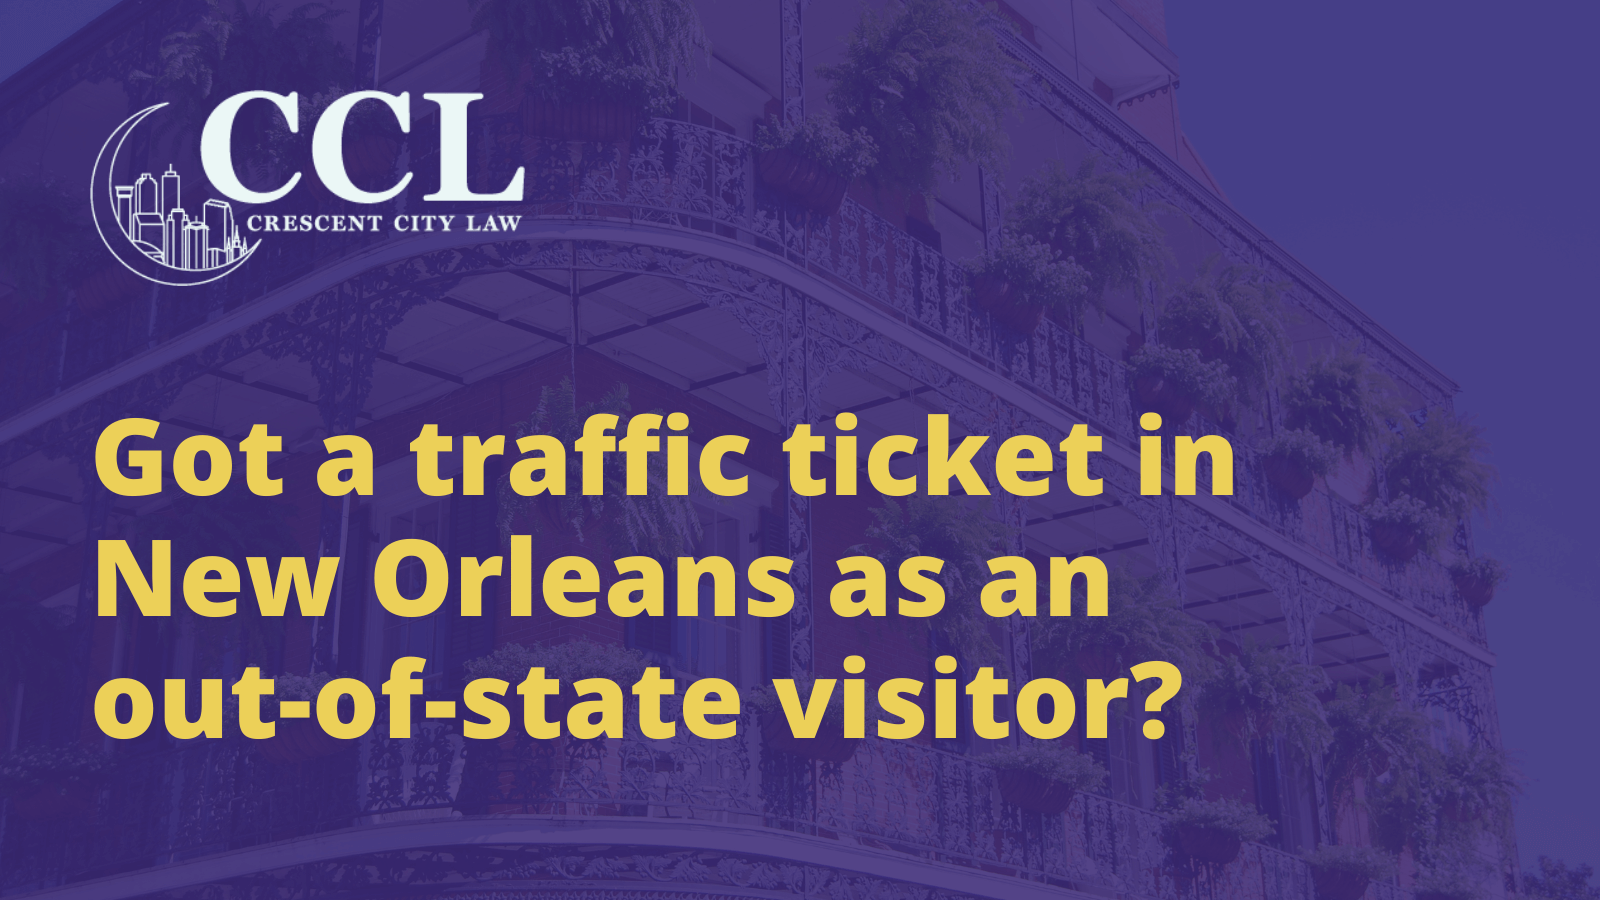 Got a traffic ticket in New Orleans as an out-of-state visitor - crescent city law firm - new orleans la